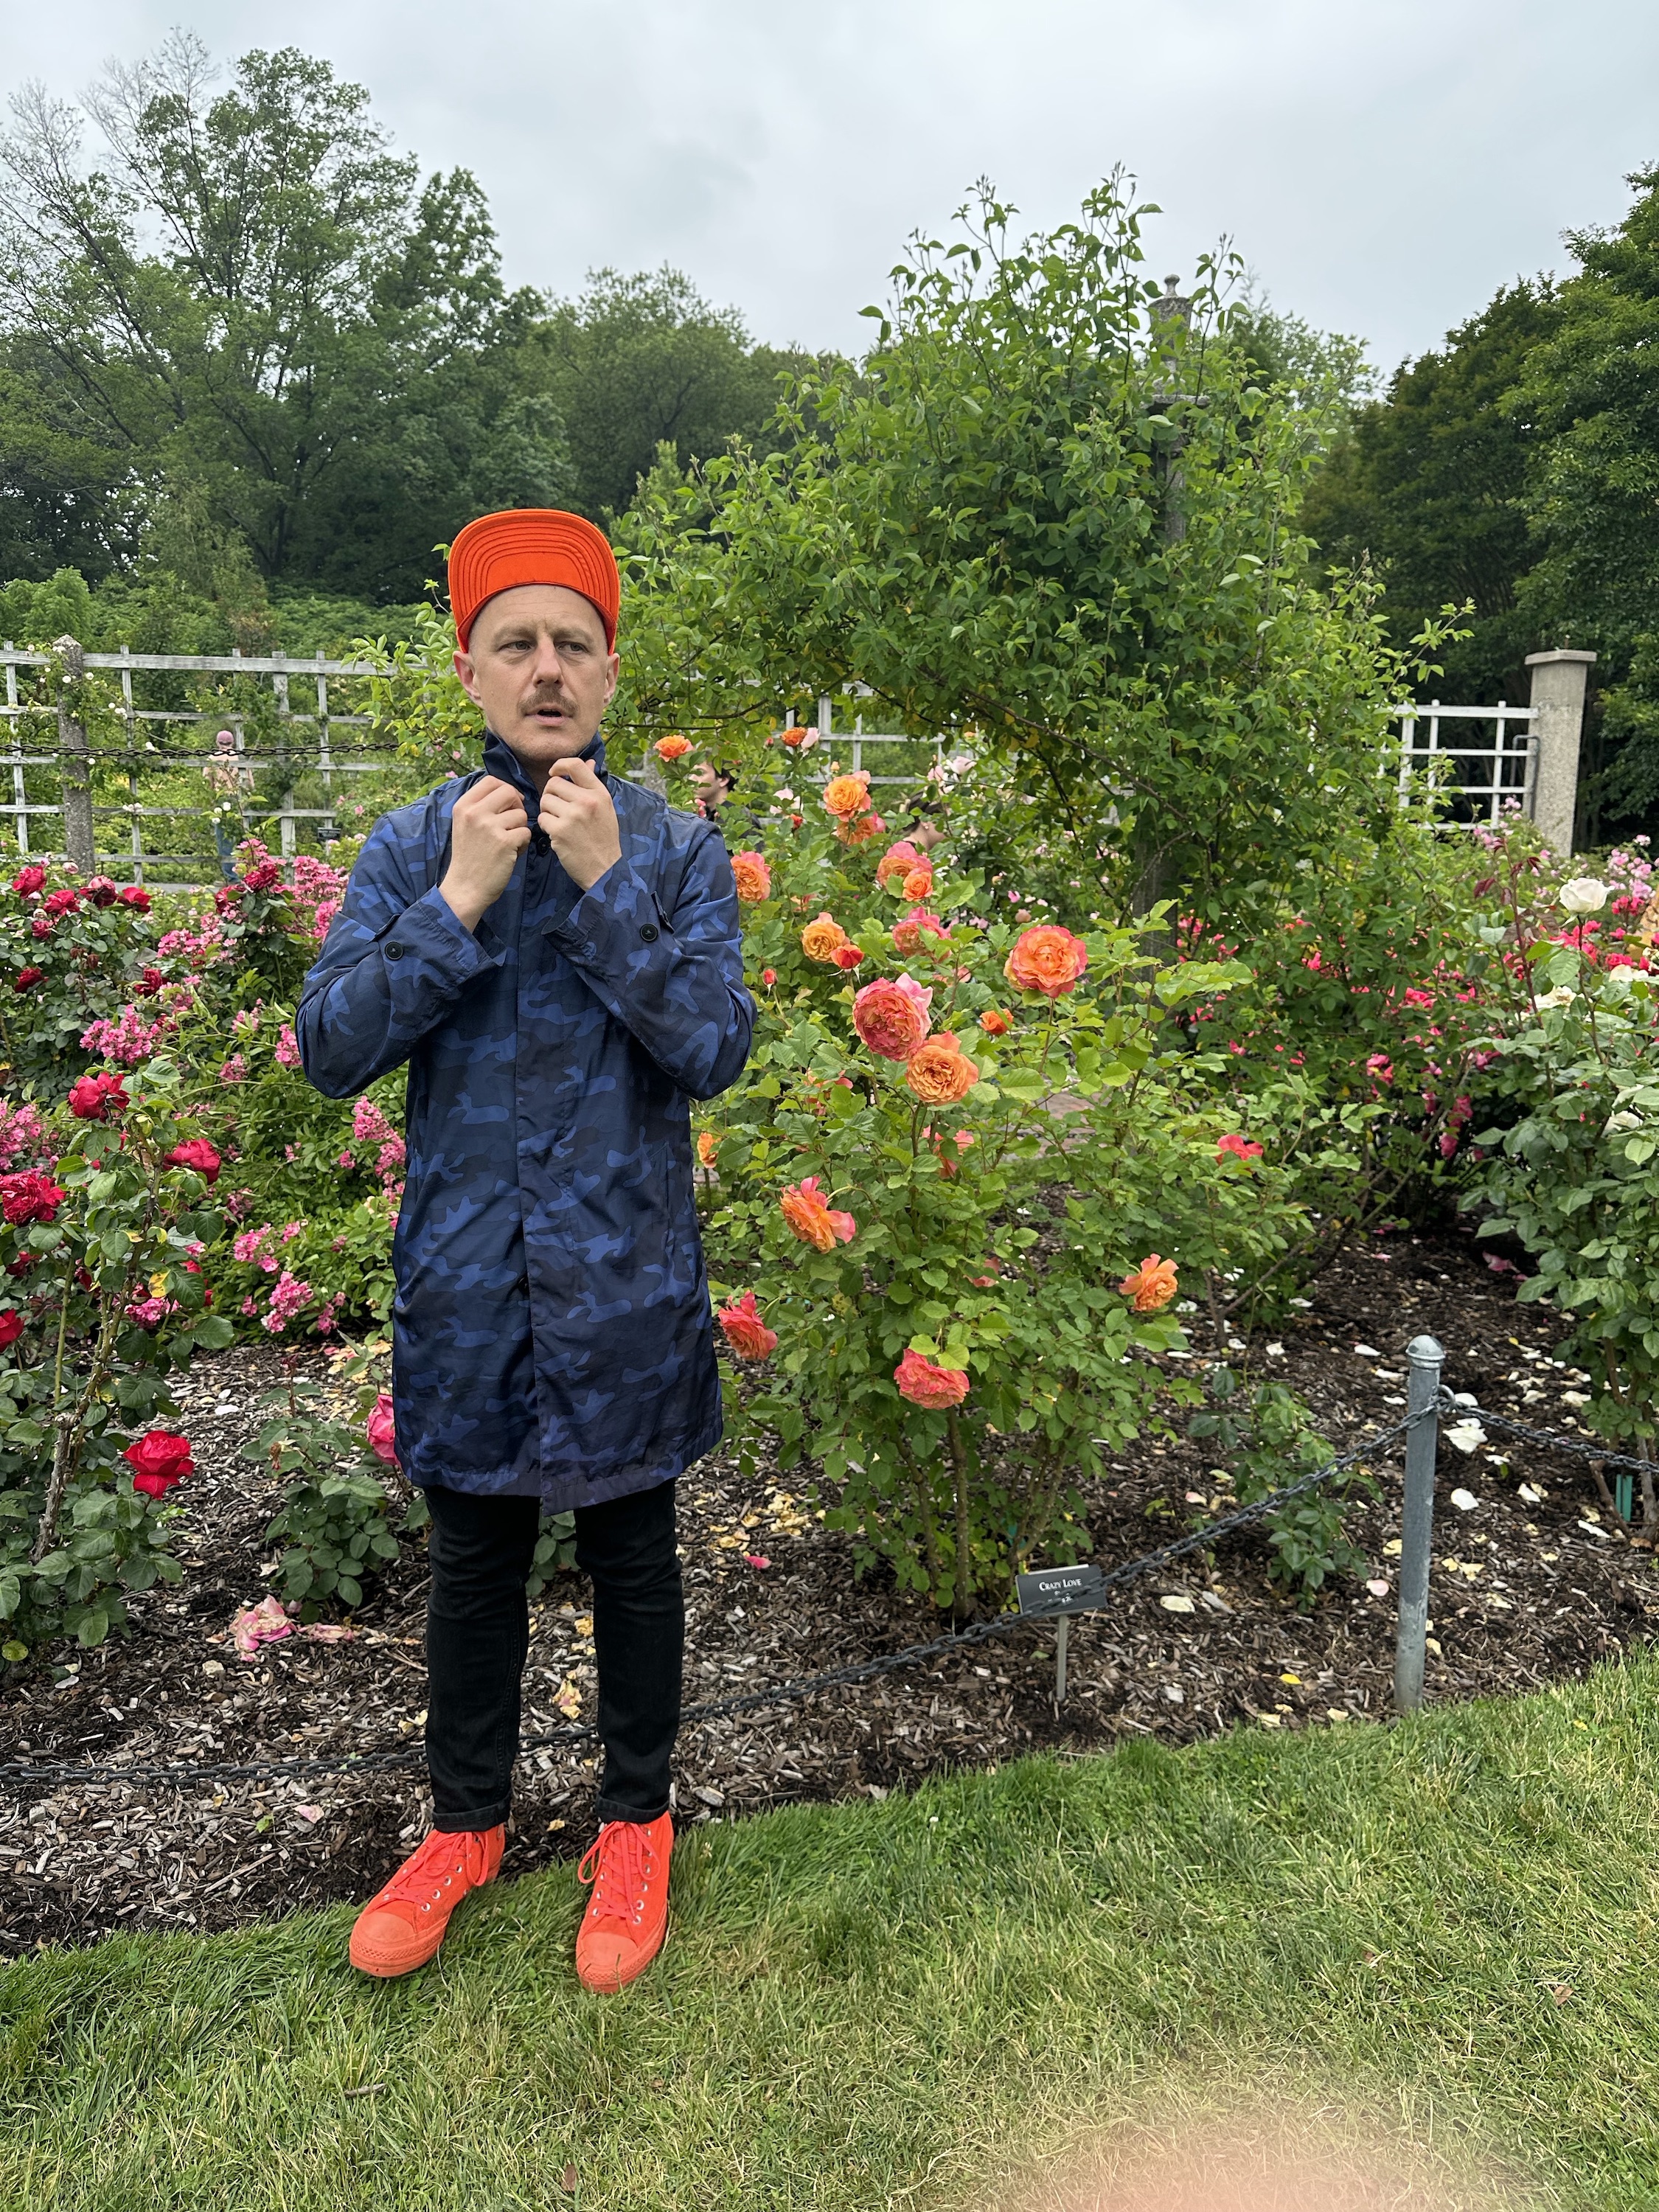 A white middle aged man with a mustache stands in a garden. He is wearing a bright orange cap on his head that almost matches the color of his shoes. He is also wearing dark blue pants and a blue camouflage rain coat.  The expression on his face suggests he is kinda goofy.